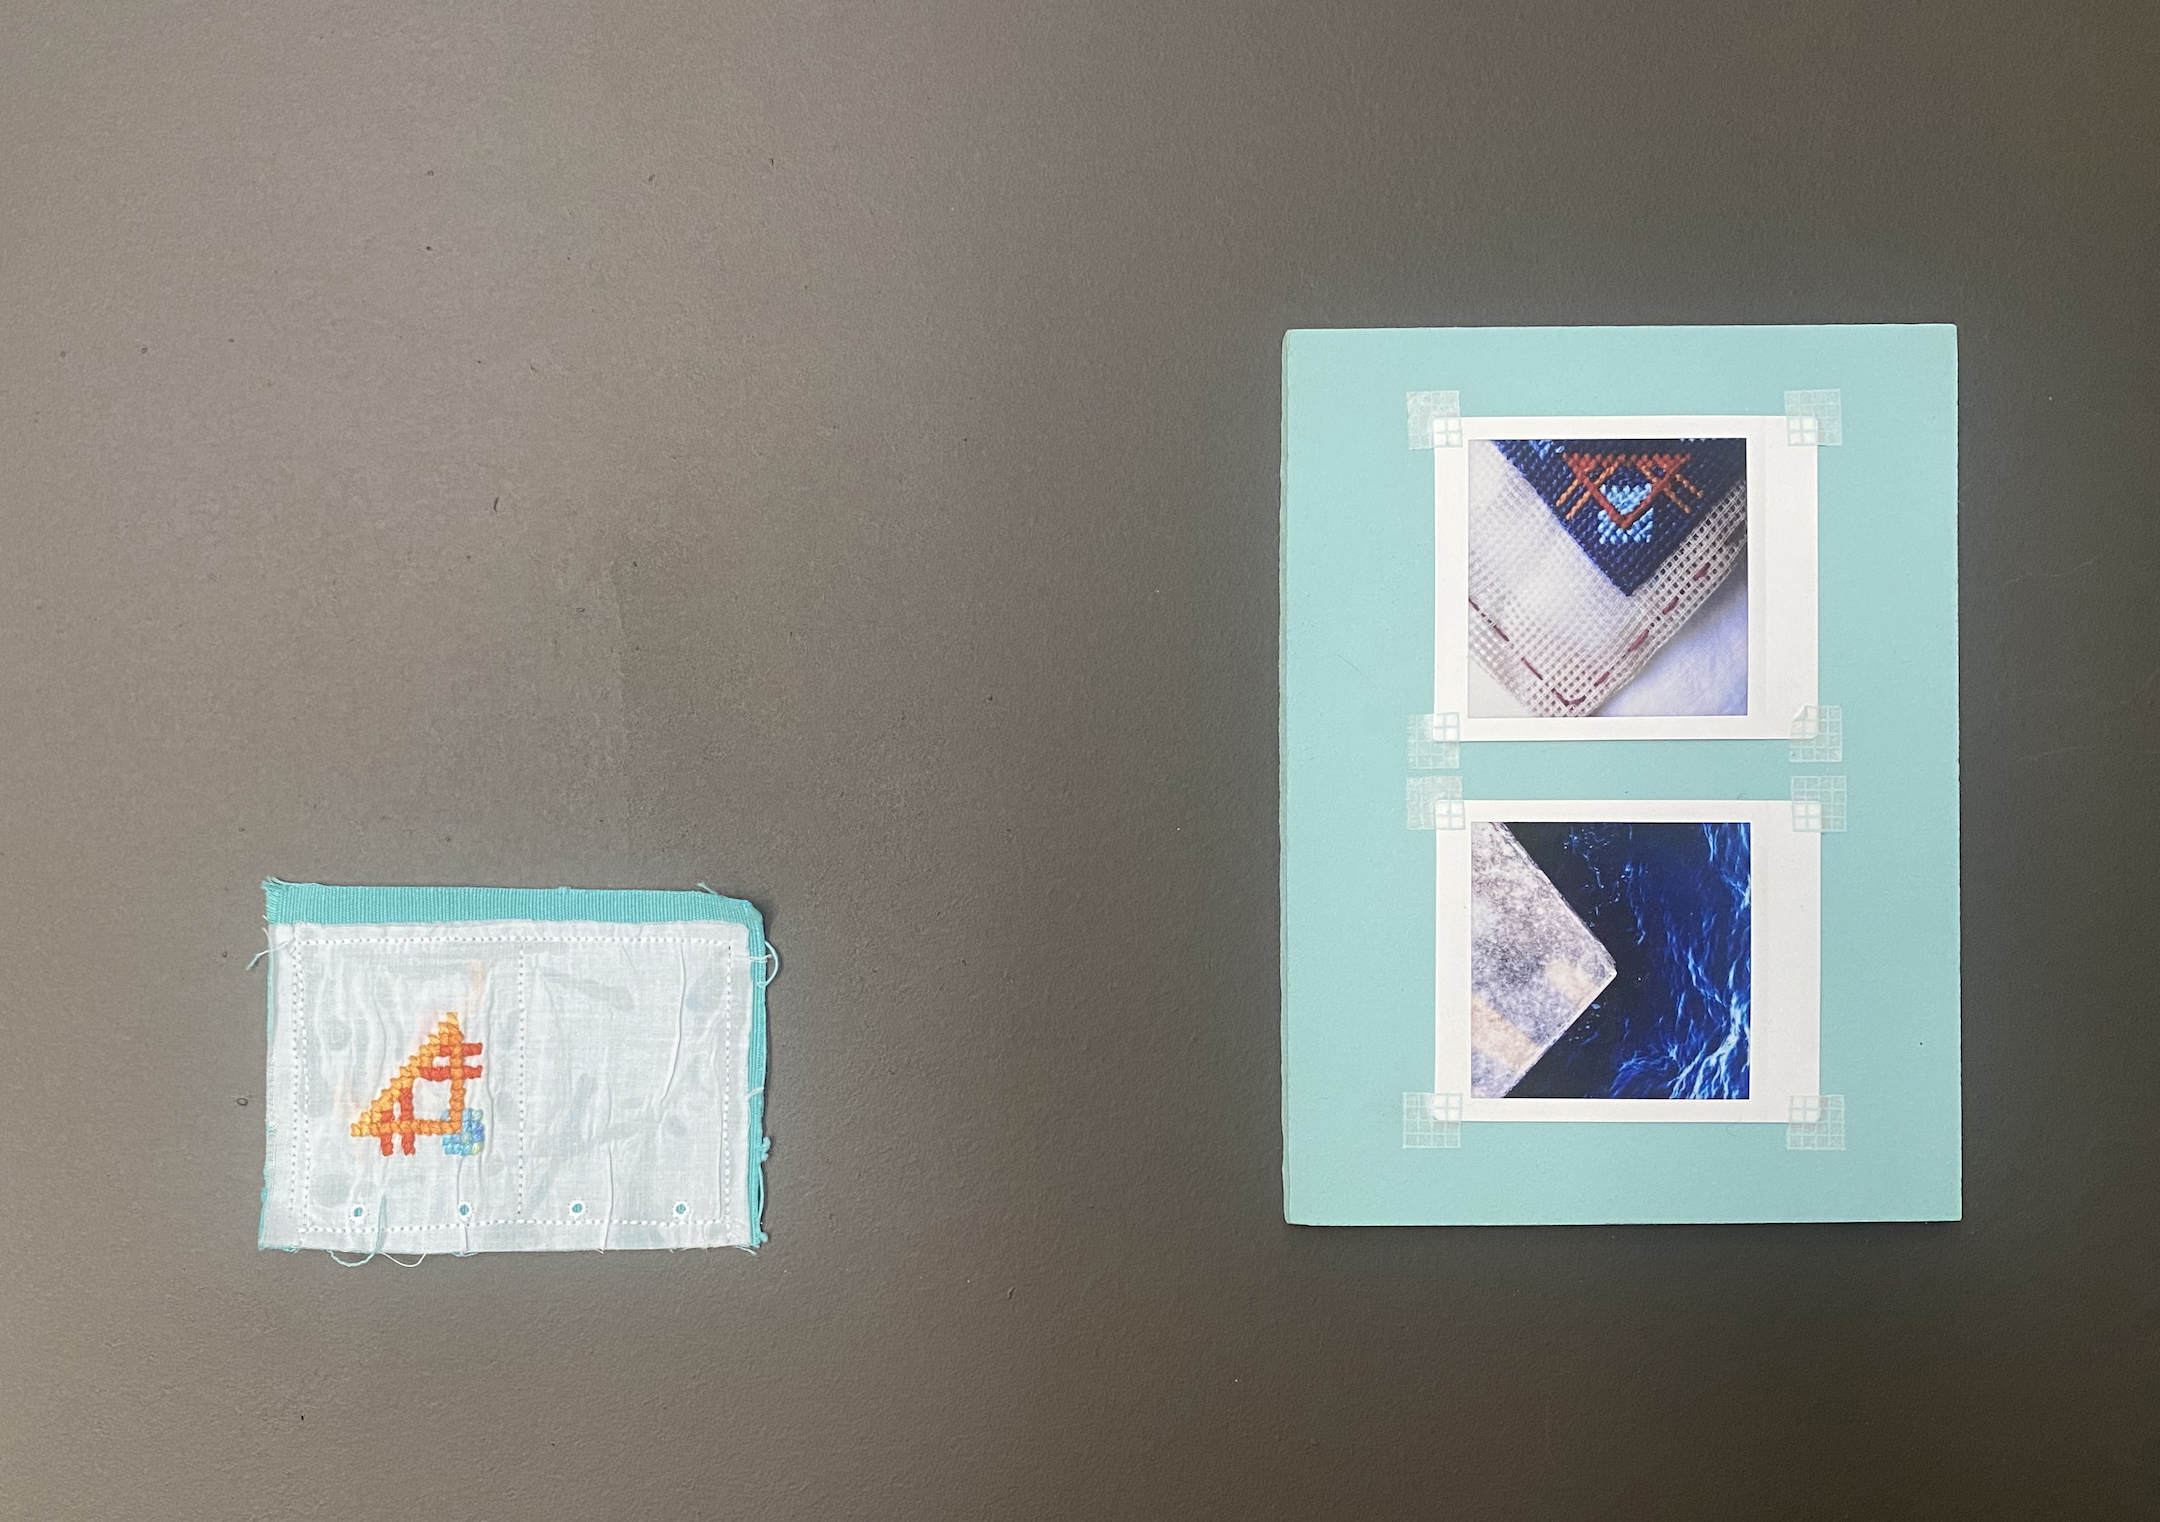 Left: Repetition of Motif - Muscle Memory, 2022, Cotton thread on linen, synthetic fabric 
Right: Polaroid image, Edge of the city, Motif, on wooden board. 